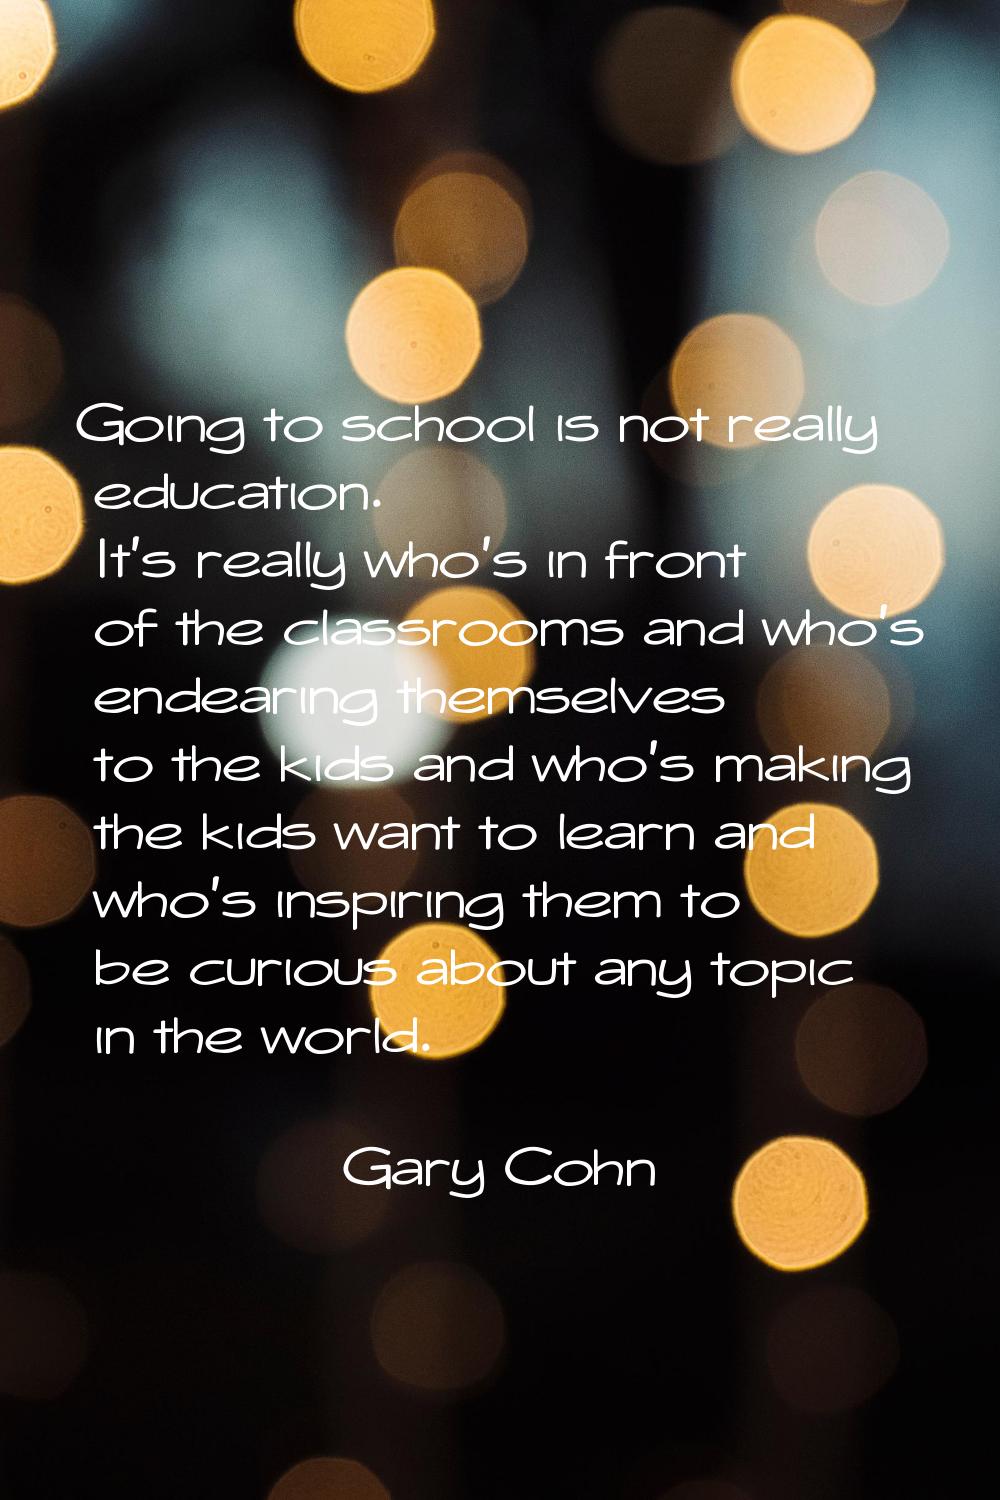 Going to school is not really education. It's really who's in front of the classrooms and who's end